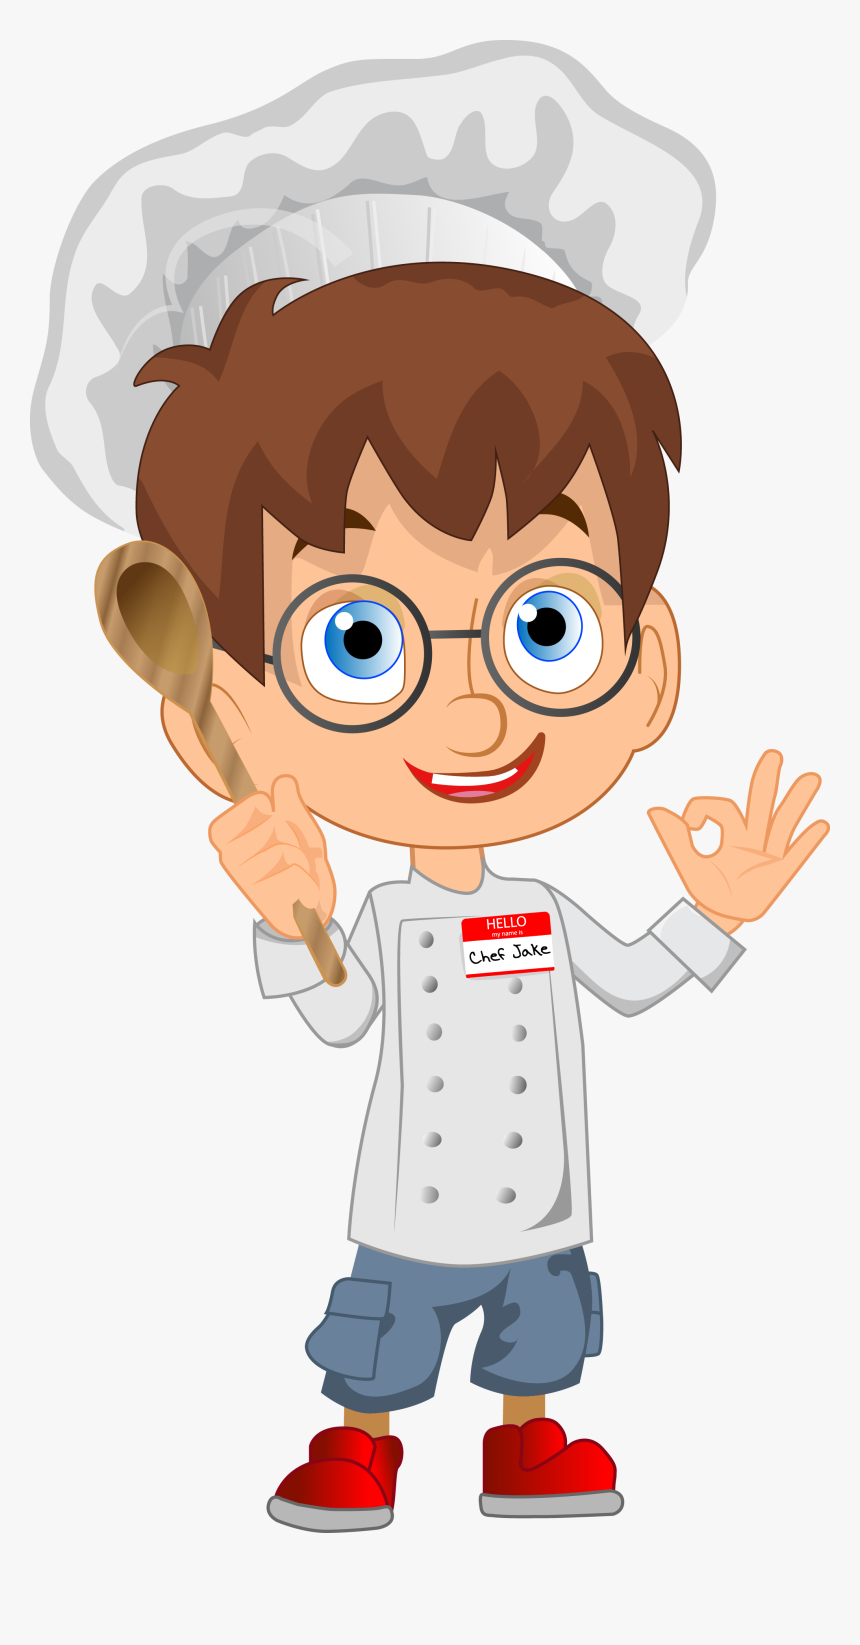 Featured image of post Chef Cartoon Images Hd Pngtree offers over 36 chef cartoon png and vector images as well as transparant background chef cartoon clipart images and psd files download the free graphic resources in the form of in addition to png format images you can also find chef cartoon vectors psd files and hd background images